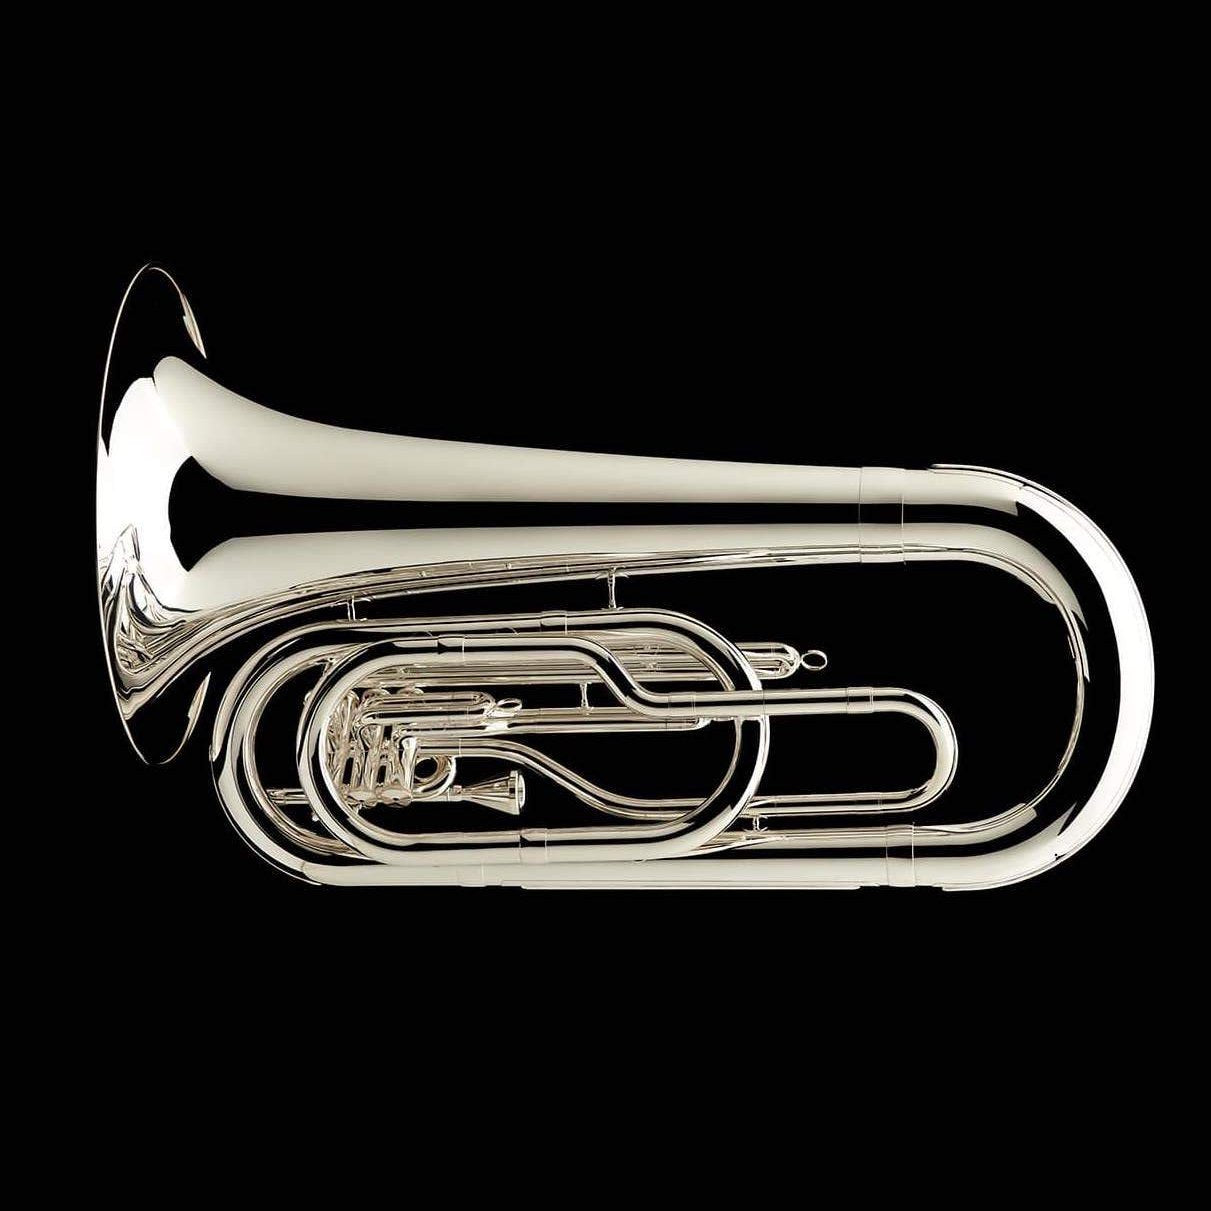 An image of a BBb 4/4 Marching Contra (tuba) in silver-plate from Wessex Tubas, facing left